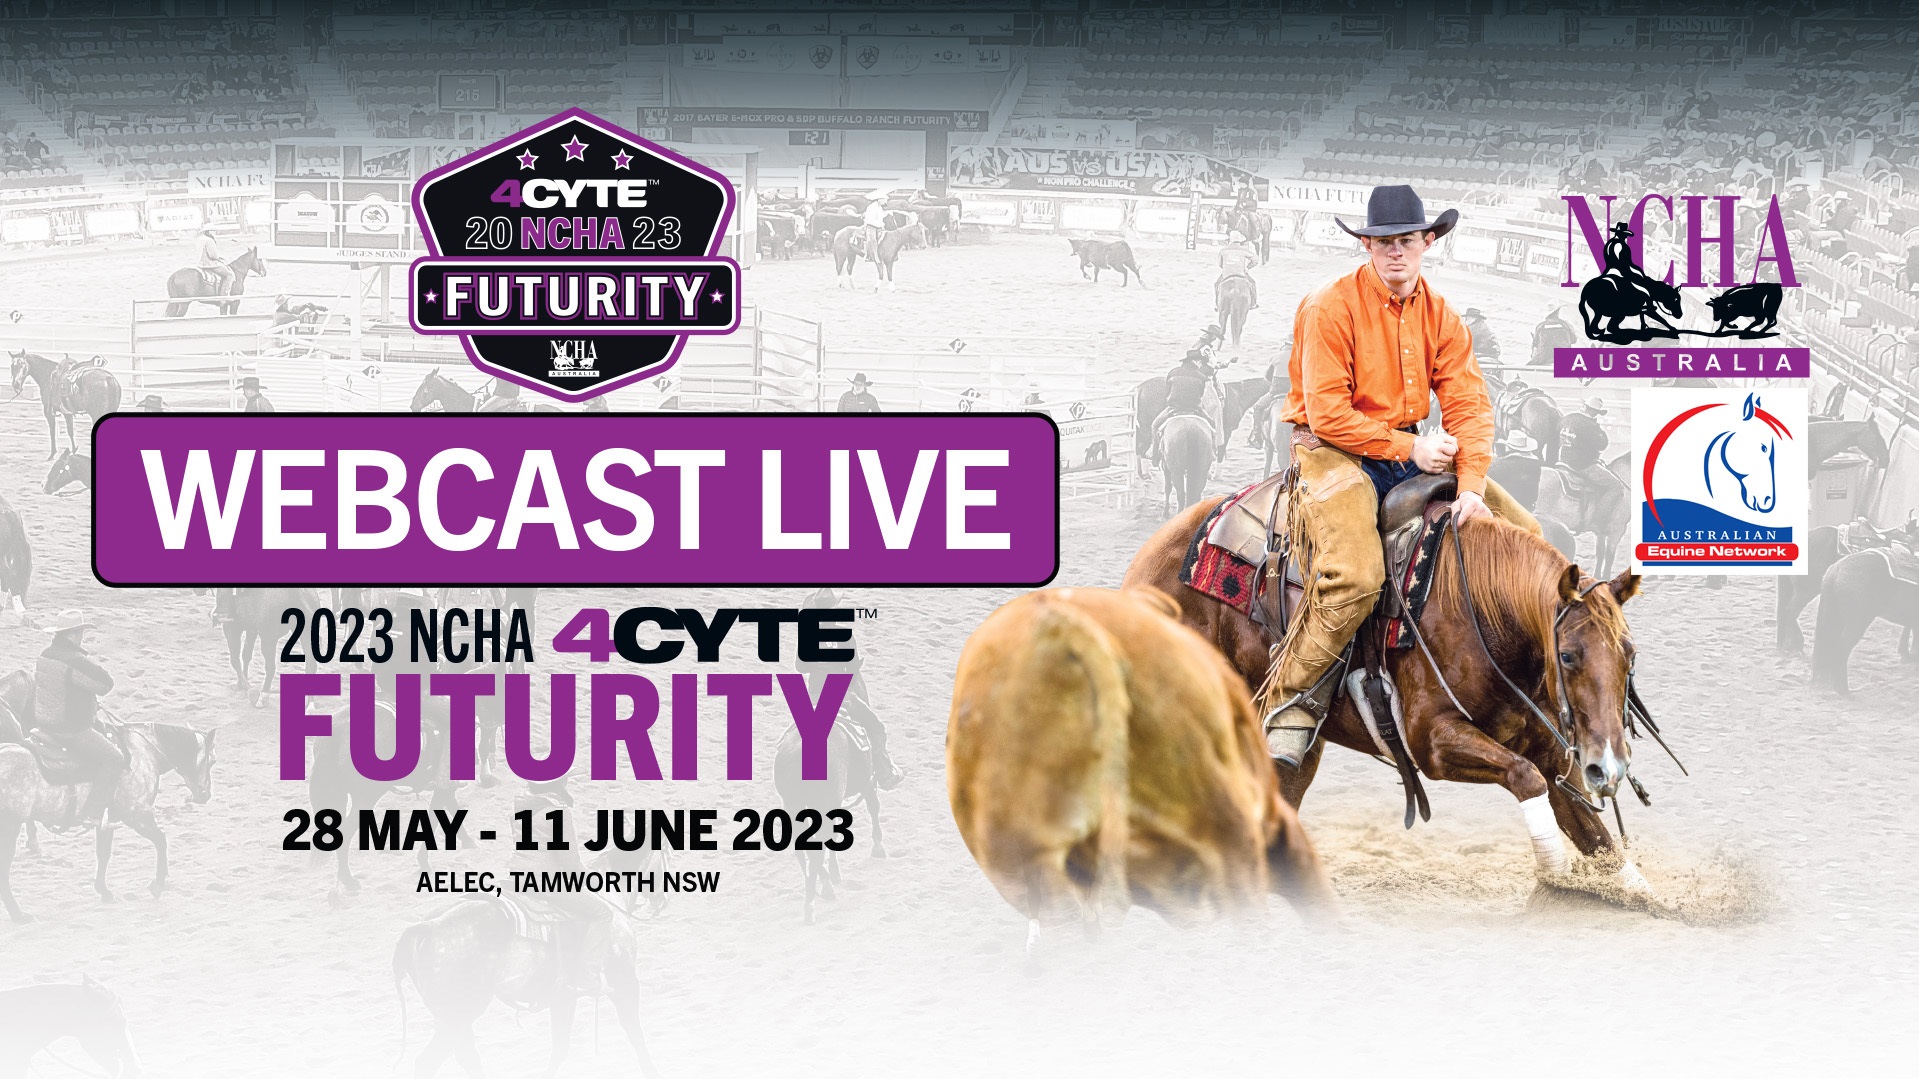 (WatchLive) The 2023 NCHA 4CYTE Futurity at Australian Equine and